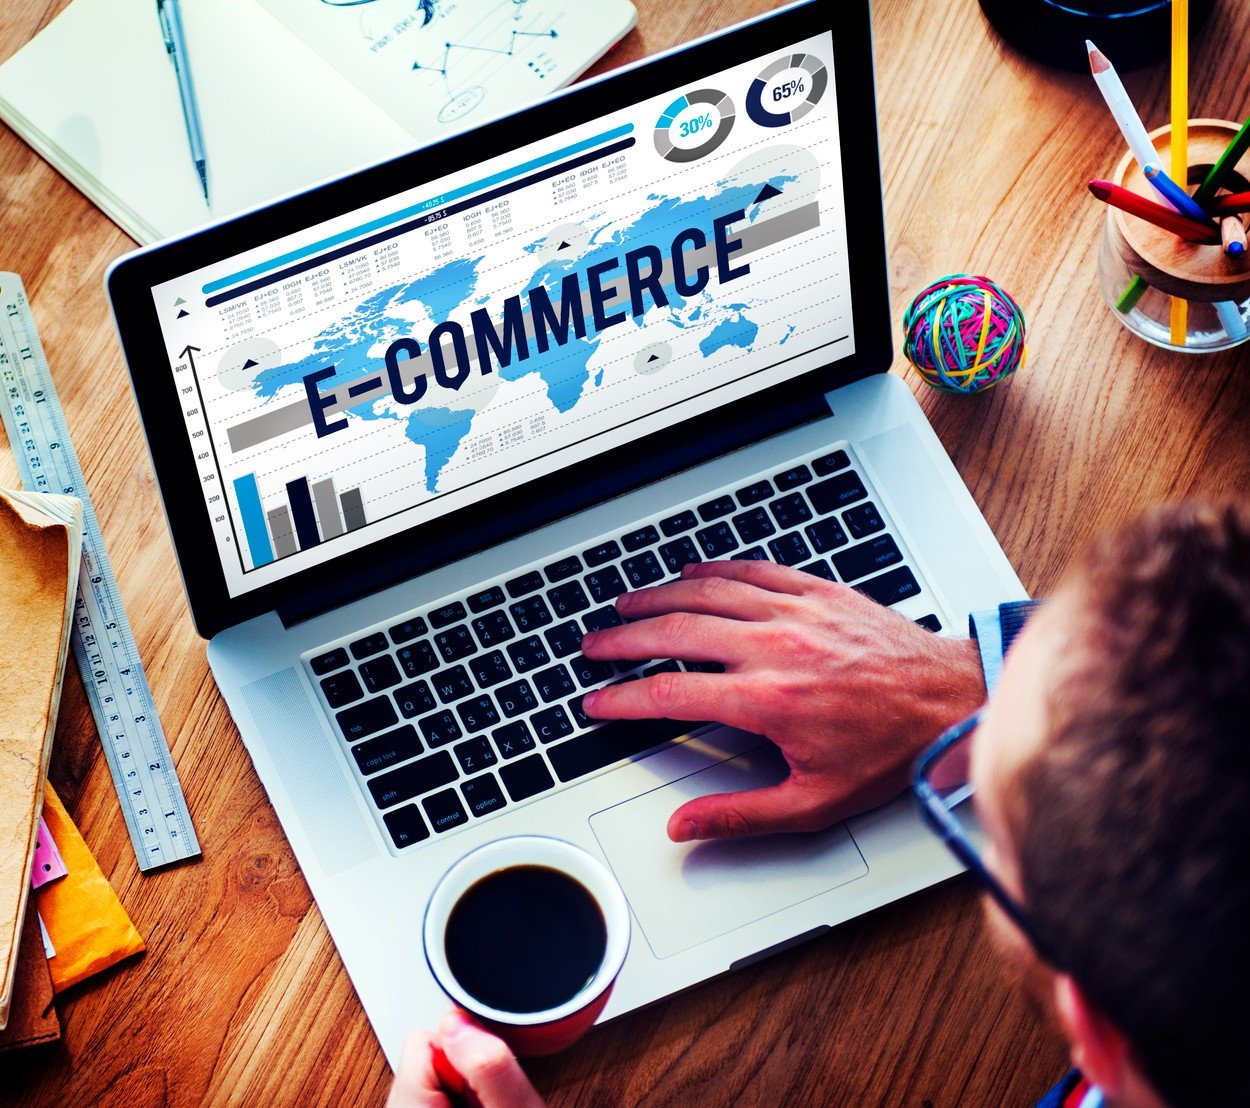 What to take into account when you choose an eCommerce platform